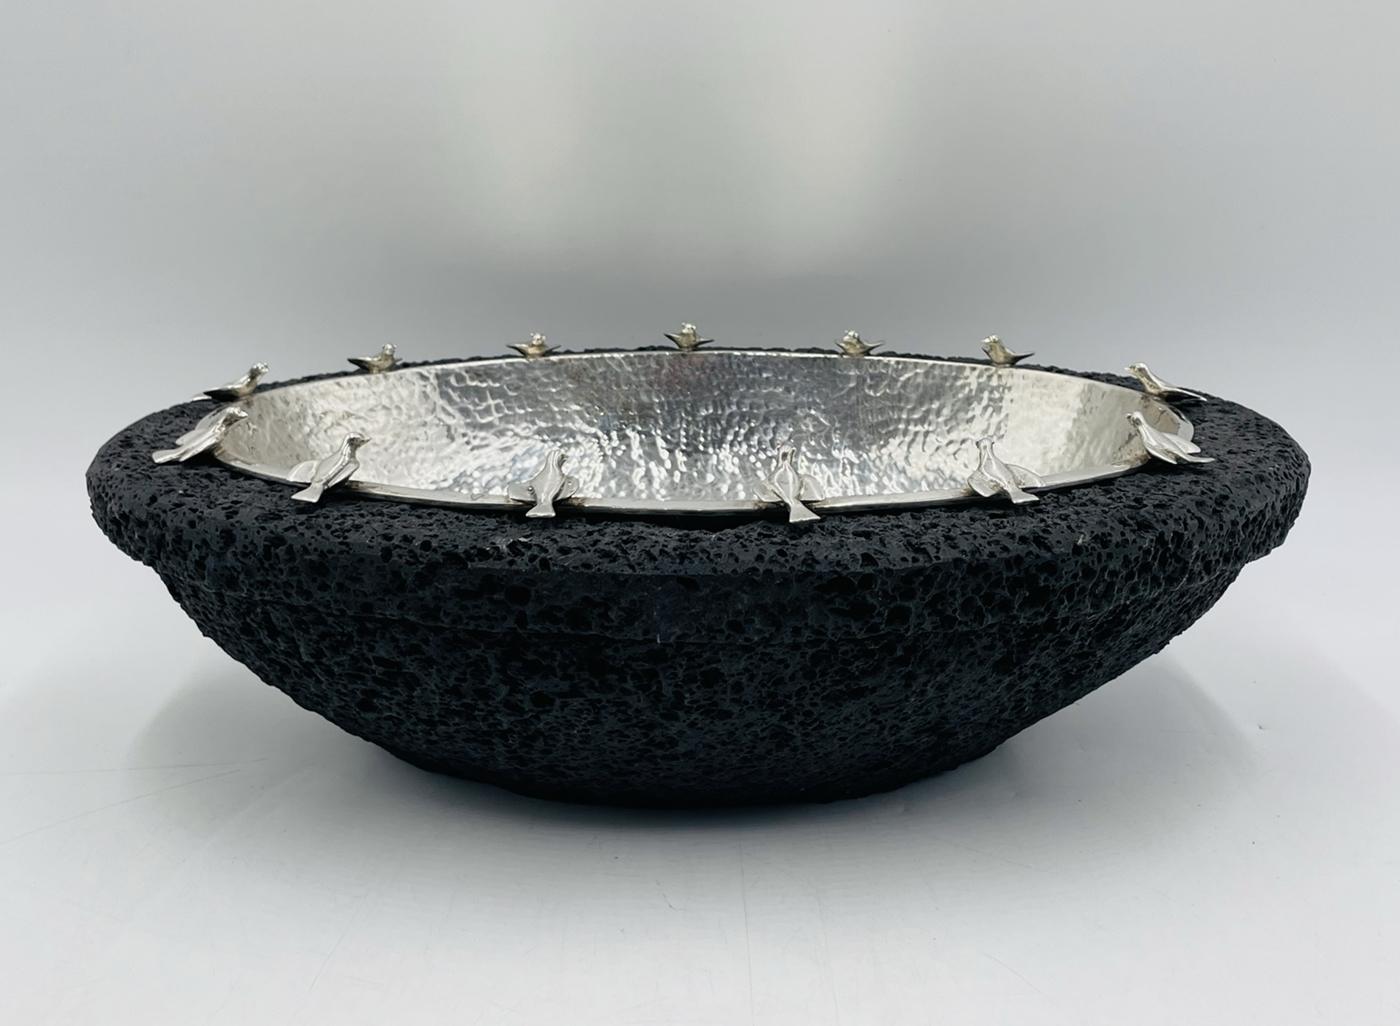 Enhance your dining experience with this exquisite Silver-Plate Bowl with Bird Detail on a Volcanic Rock Bowl by Emilia Castillo. 
The piece is hand crafted in Taxco Gerrero in the Emilia Castillo workshop by skilled artisans.
Crafted with precision